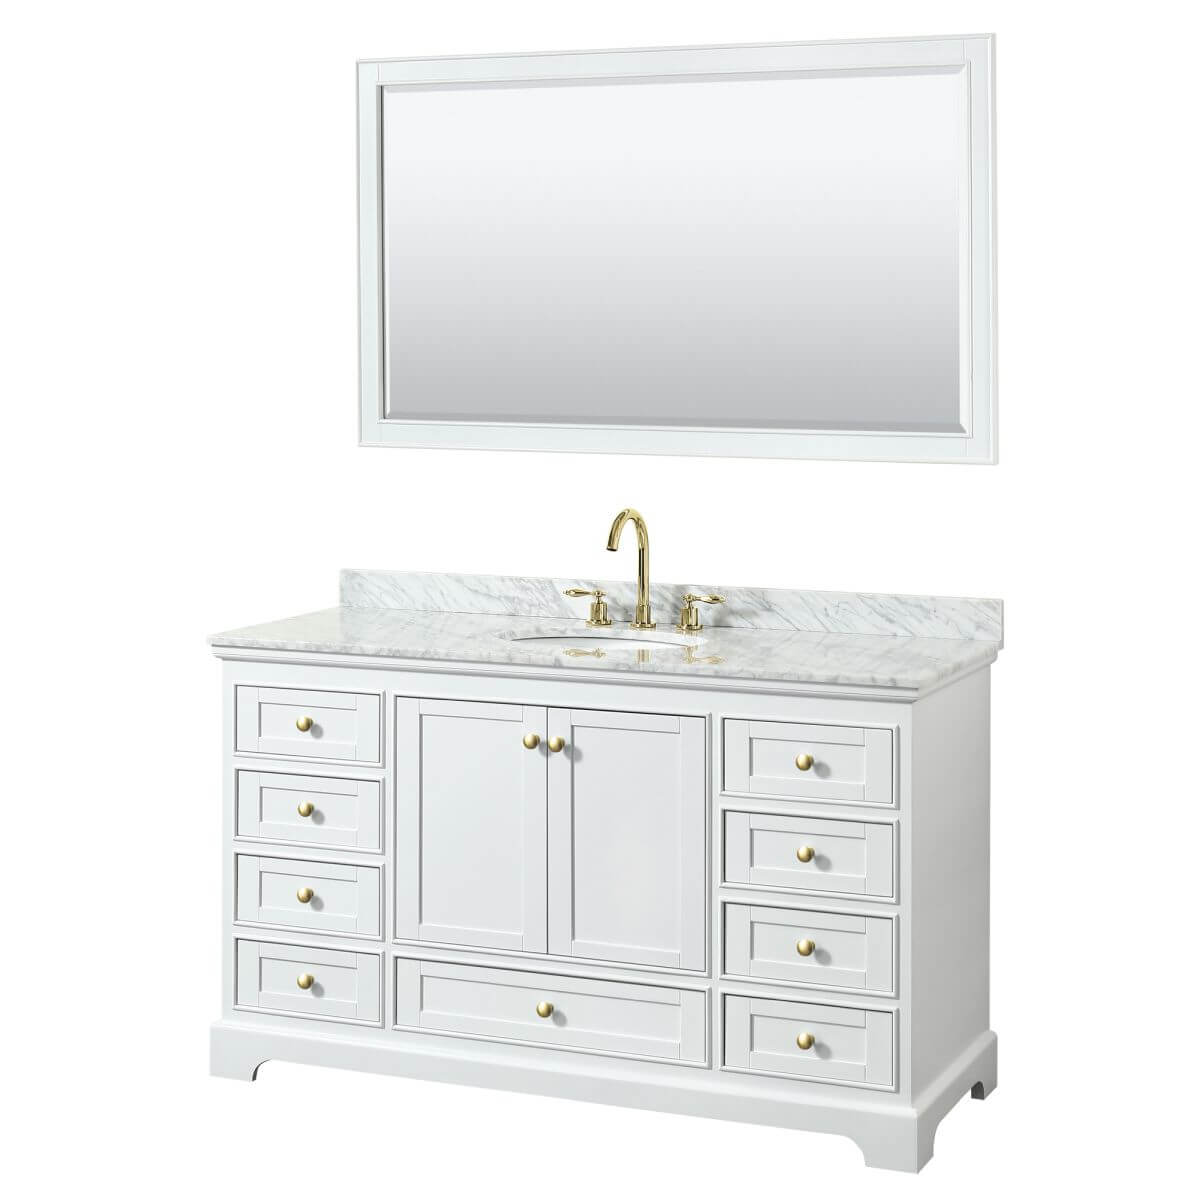 Wyndham Collection Deborah 60 inch Single Bathroom Vanity in White with White Carrara Marble Countertop, Undermount Oval Sink, Brushed Gold Trim and 58 inch Mirror - WCS202060SWGCMUNOM58